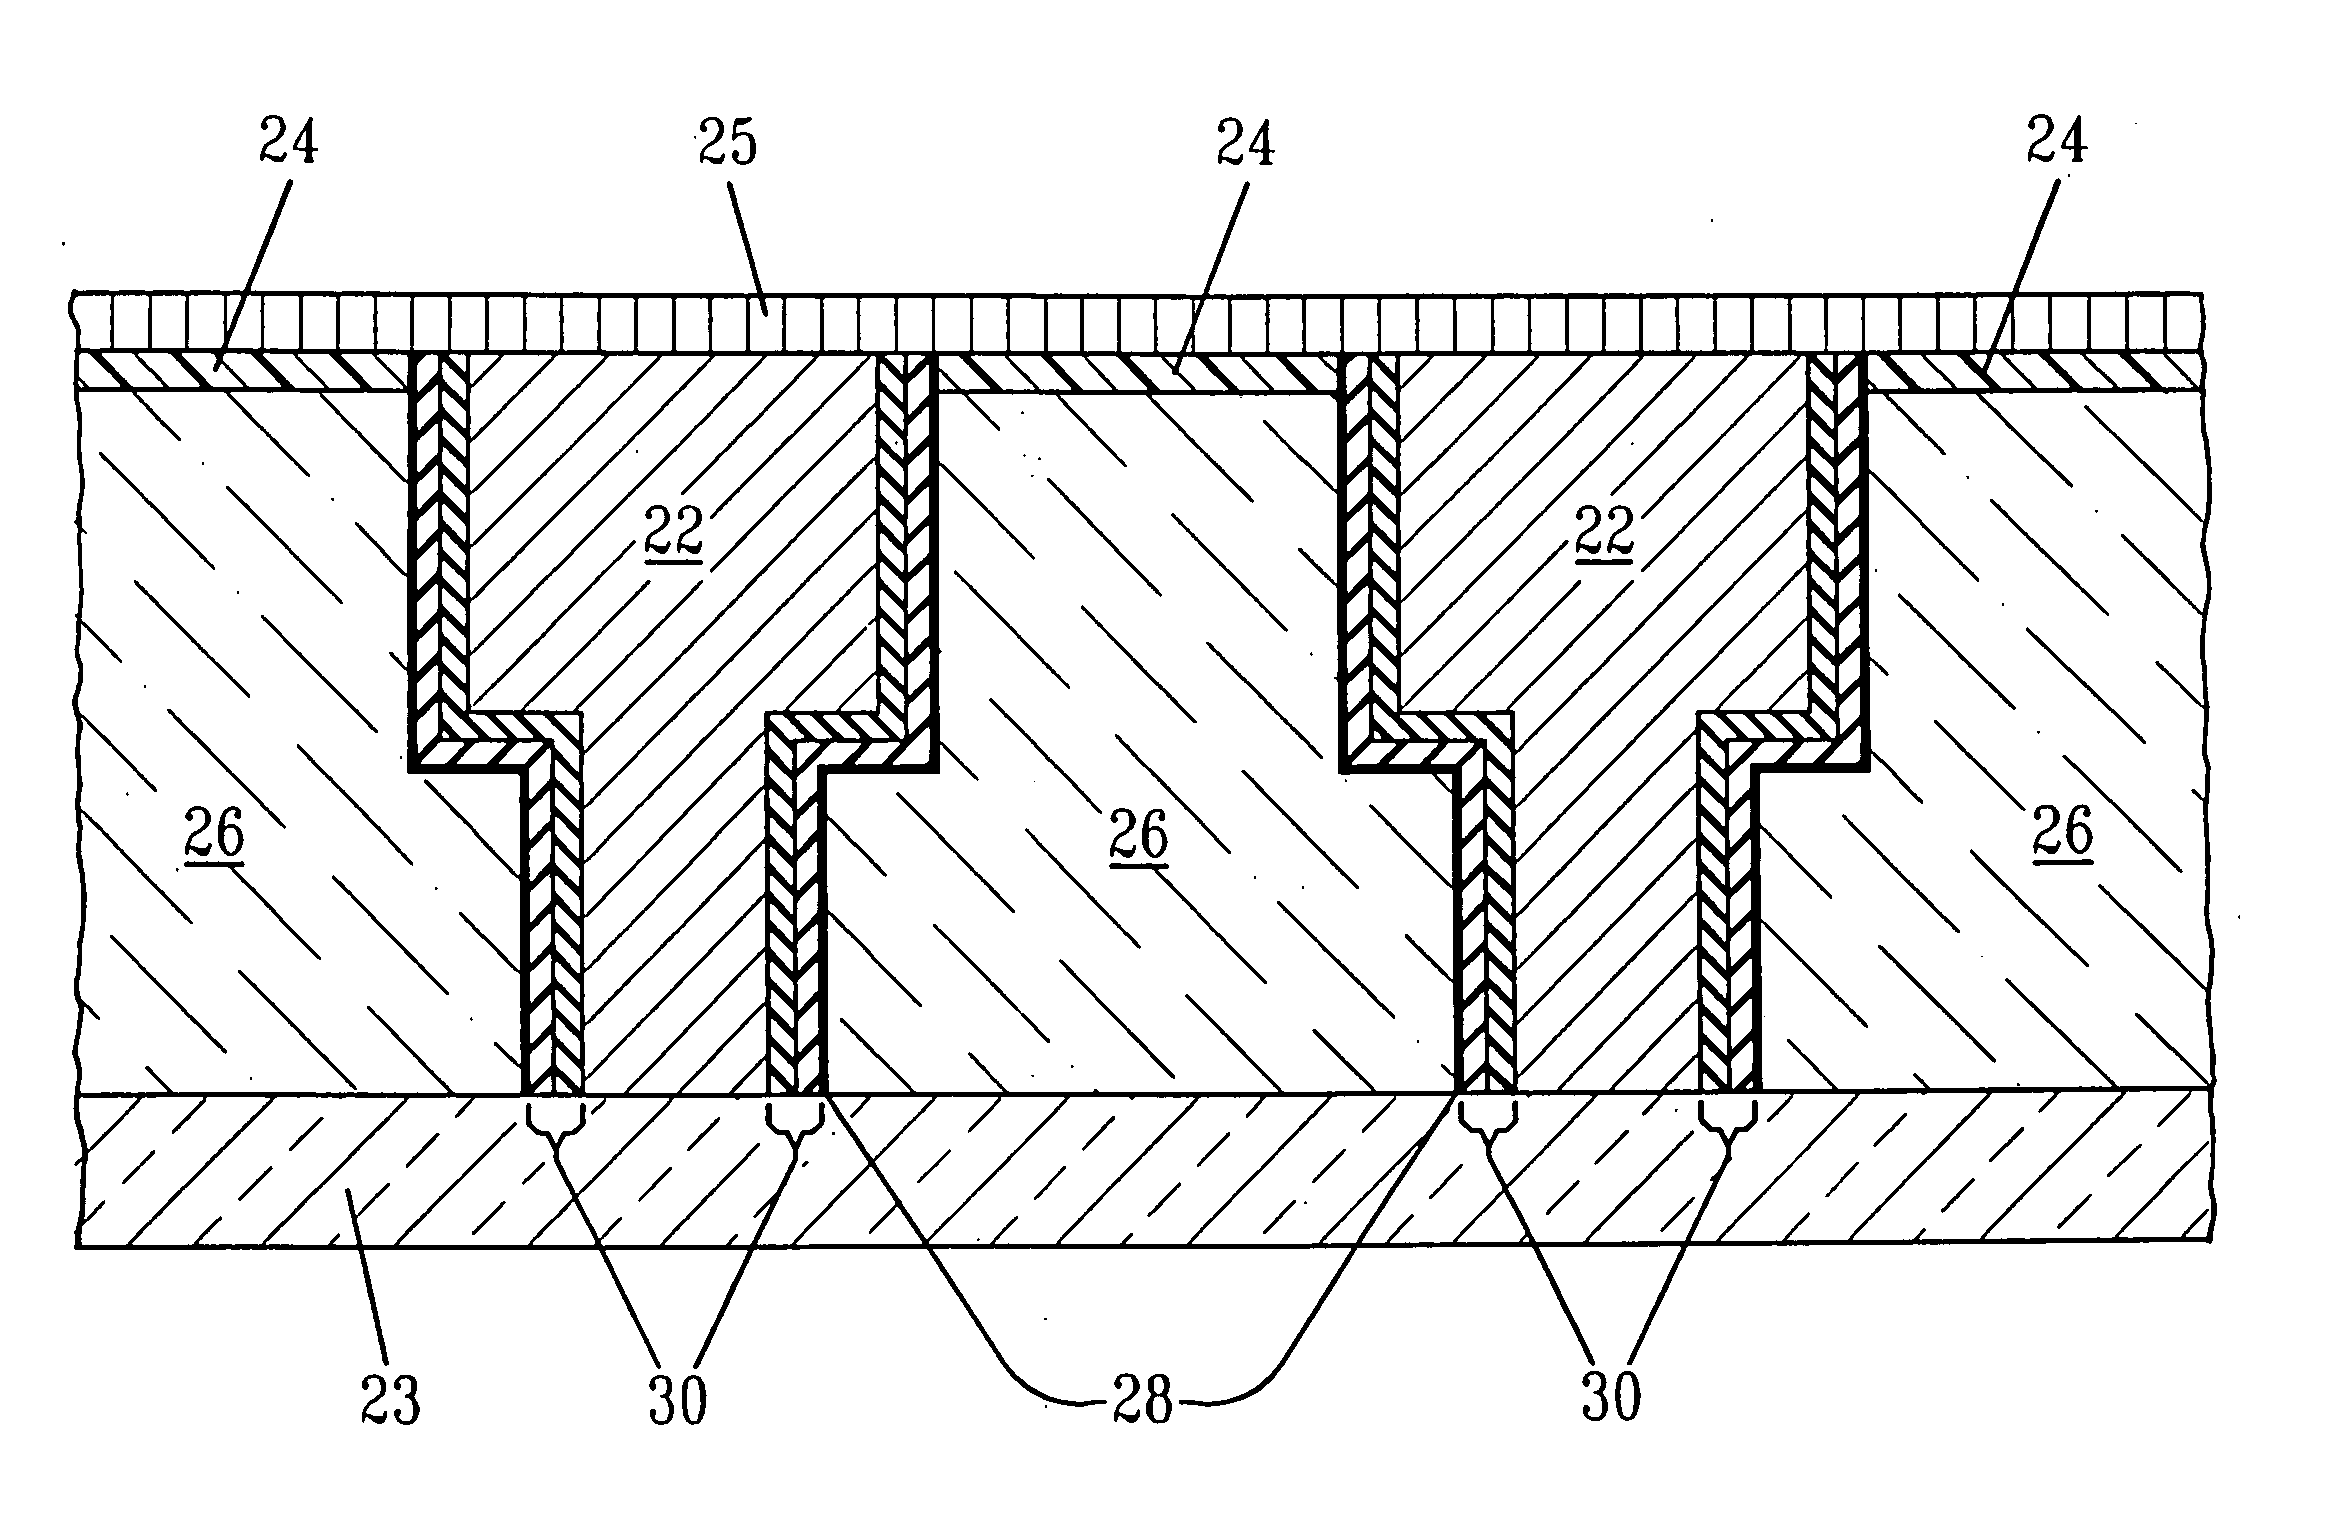 Structures and methods for intergration of ultralow-k dielectrics with improved reliability